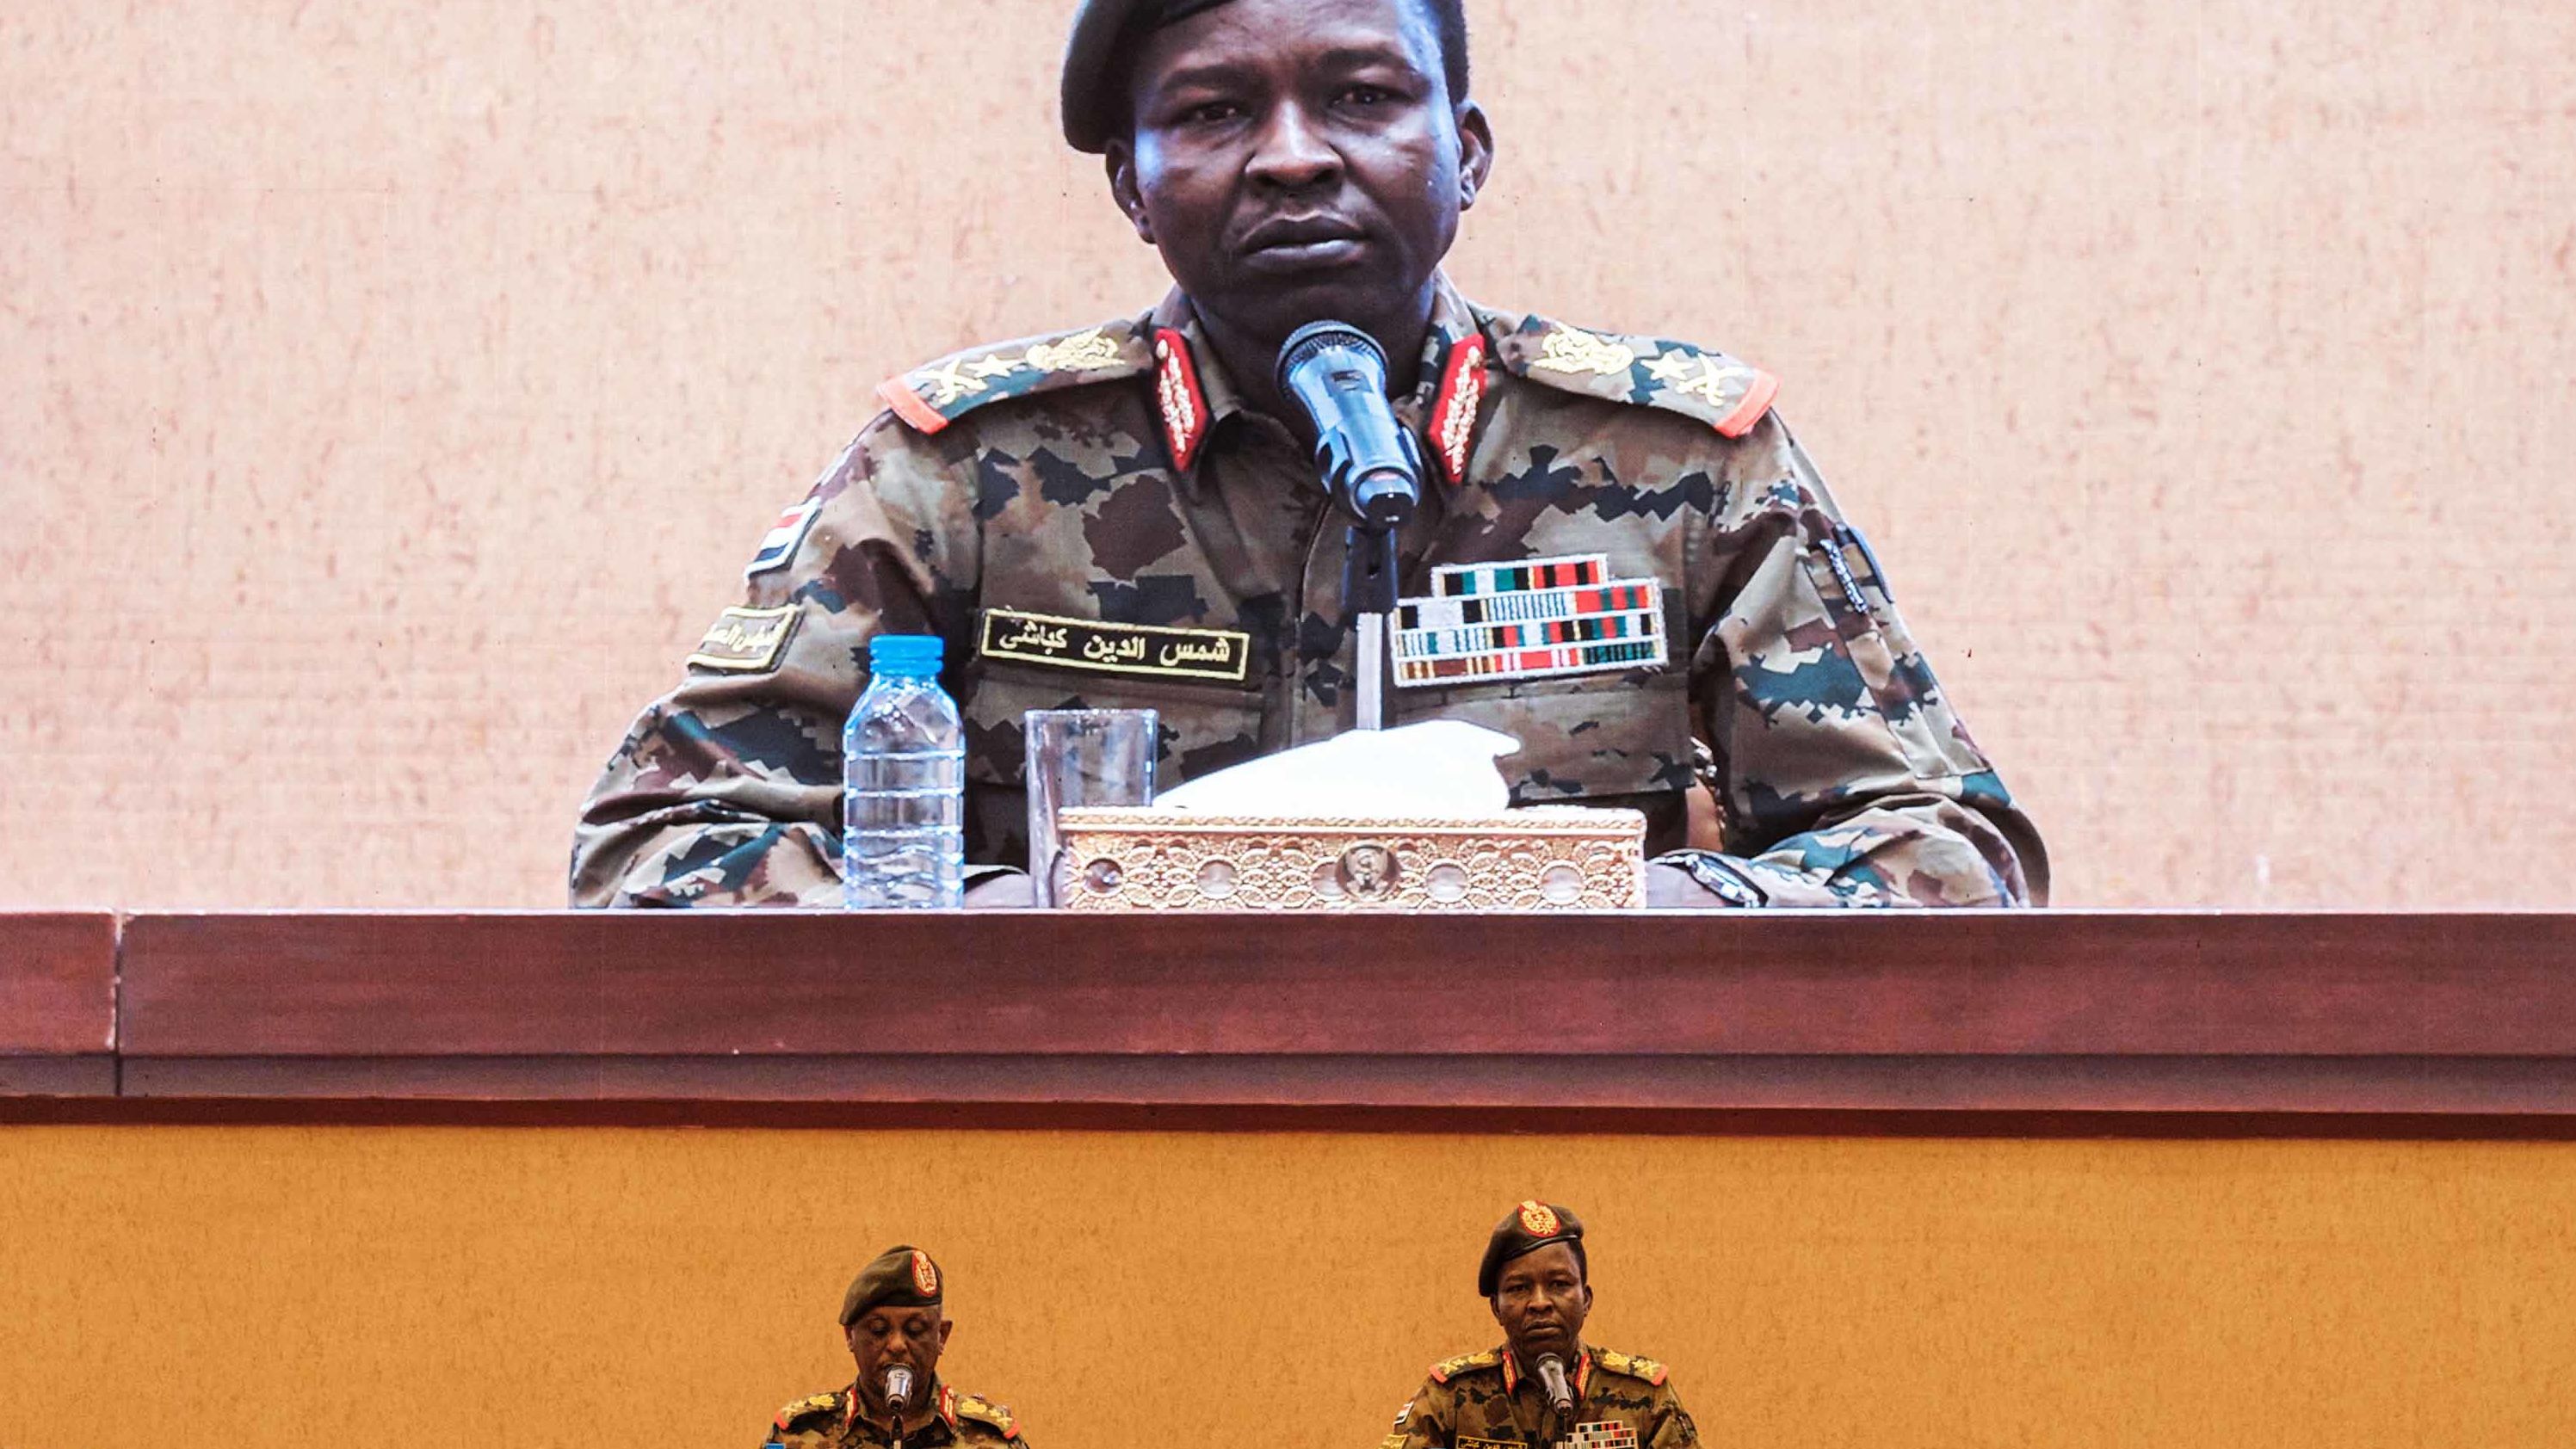 Sudan's Transitional Military Council spokesman Shams-Eddin Kabashi, right, speaks during a press conference at the Presidential Palace in Khartoum on June 13. Sudan's ruling military council admitted that it had ordered the dispersal of a Khartoum sit-in, which left more than 100 dead.